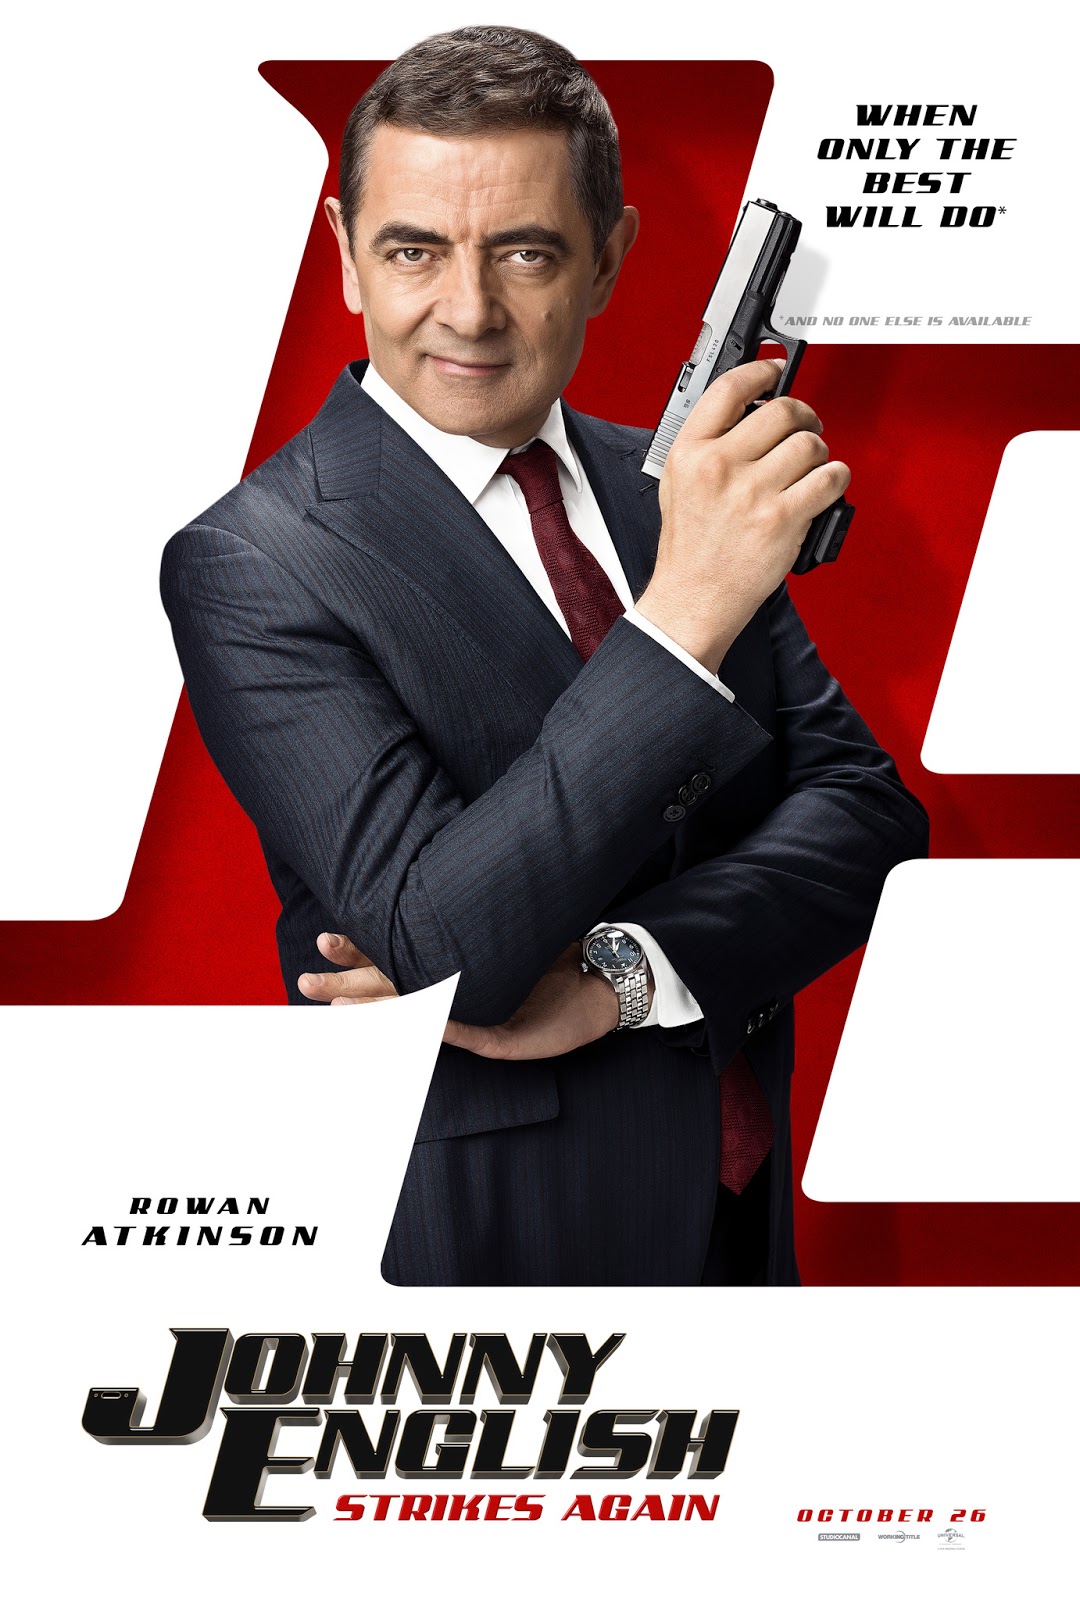 Johnny English Strikes Again (2018) Watch Full Video Free Online